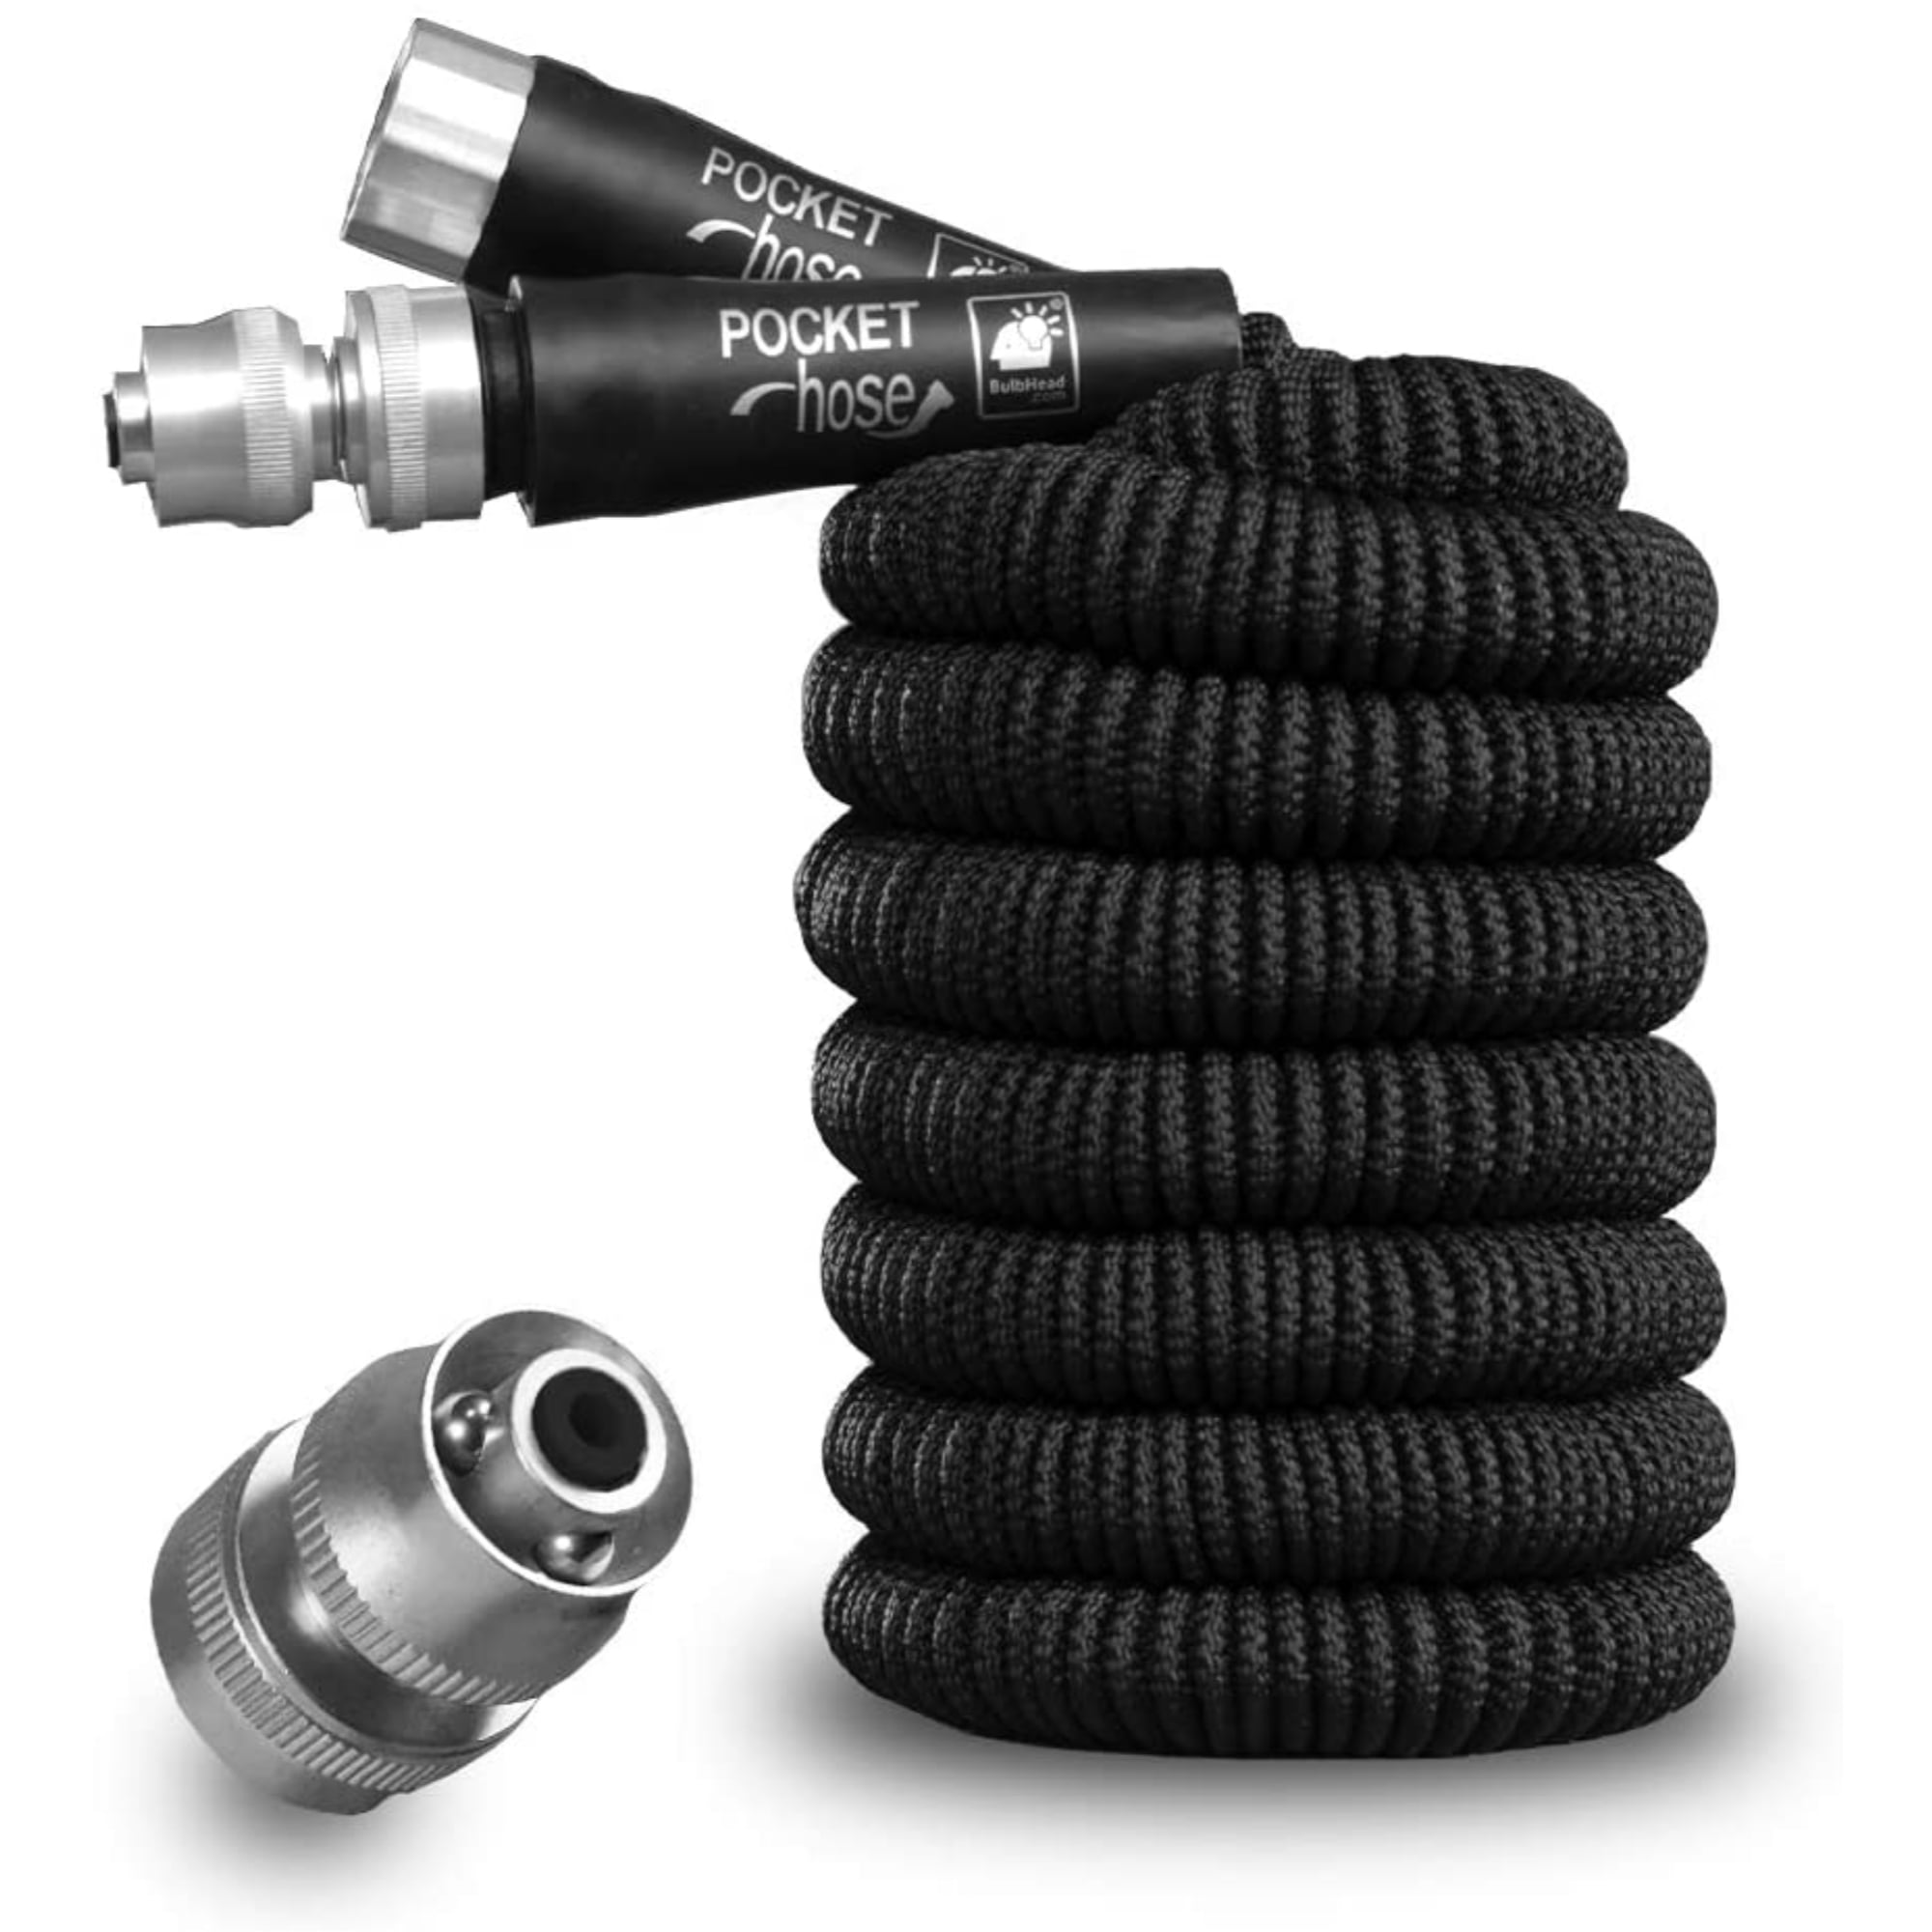 Pocket Hose with Expandable Water Aluminum Lead-Free Hose Bullet BulbHead, Silver Connectors by Hose